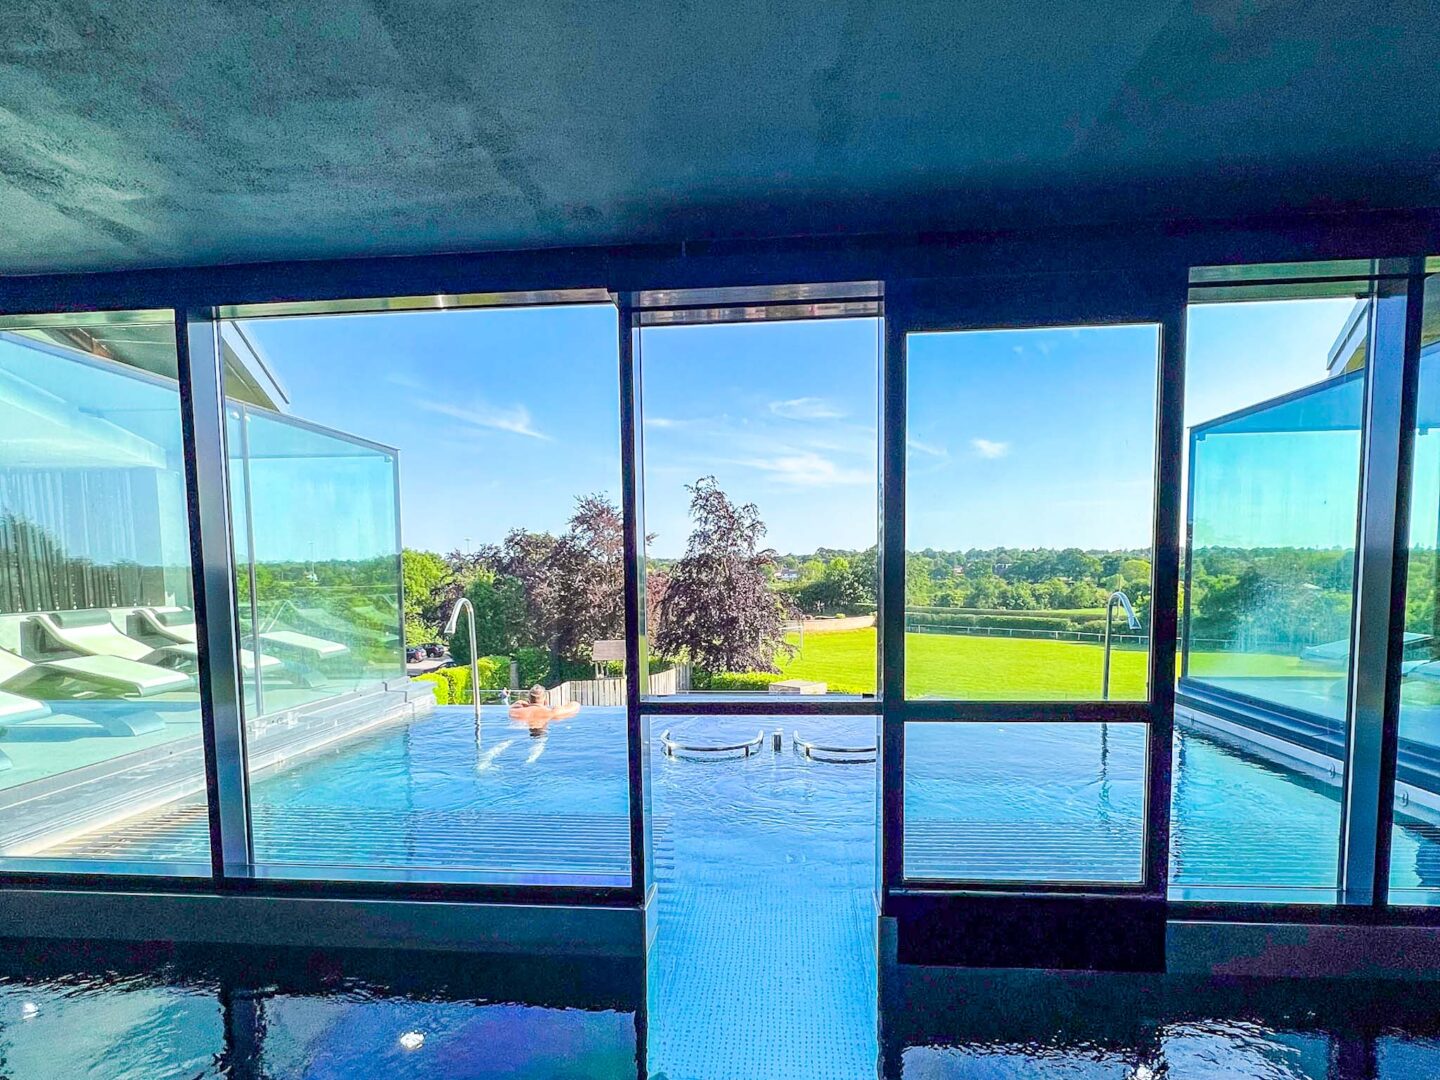 Things to do in Altrincham, infinity pool at Hale Country Club Spa with blue skies